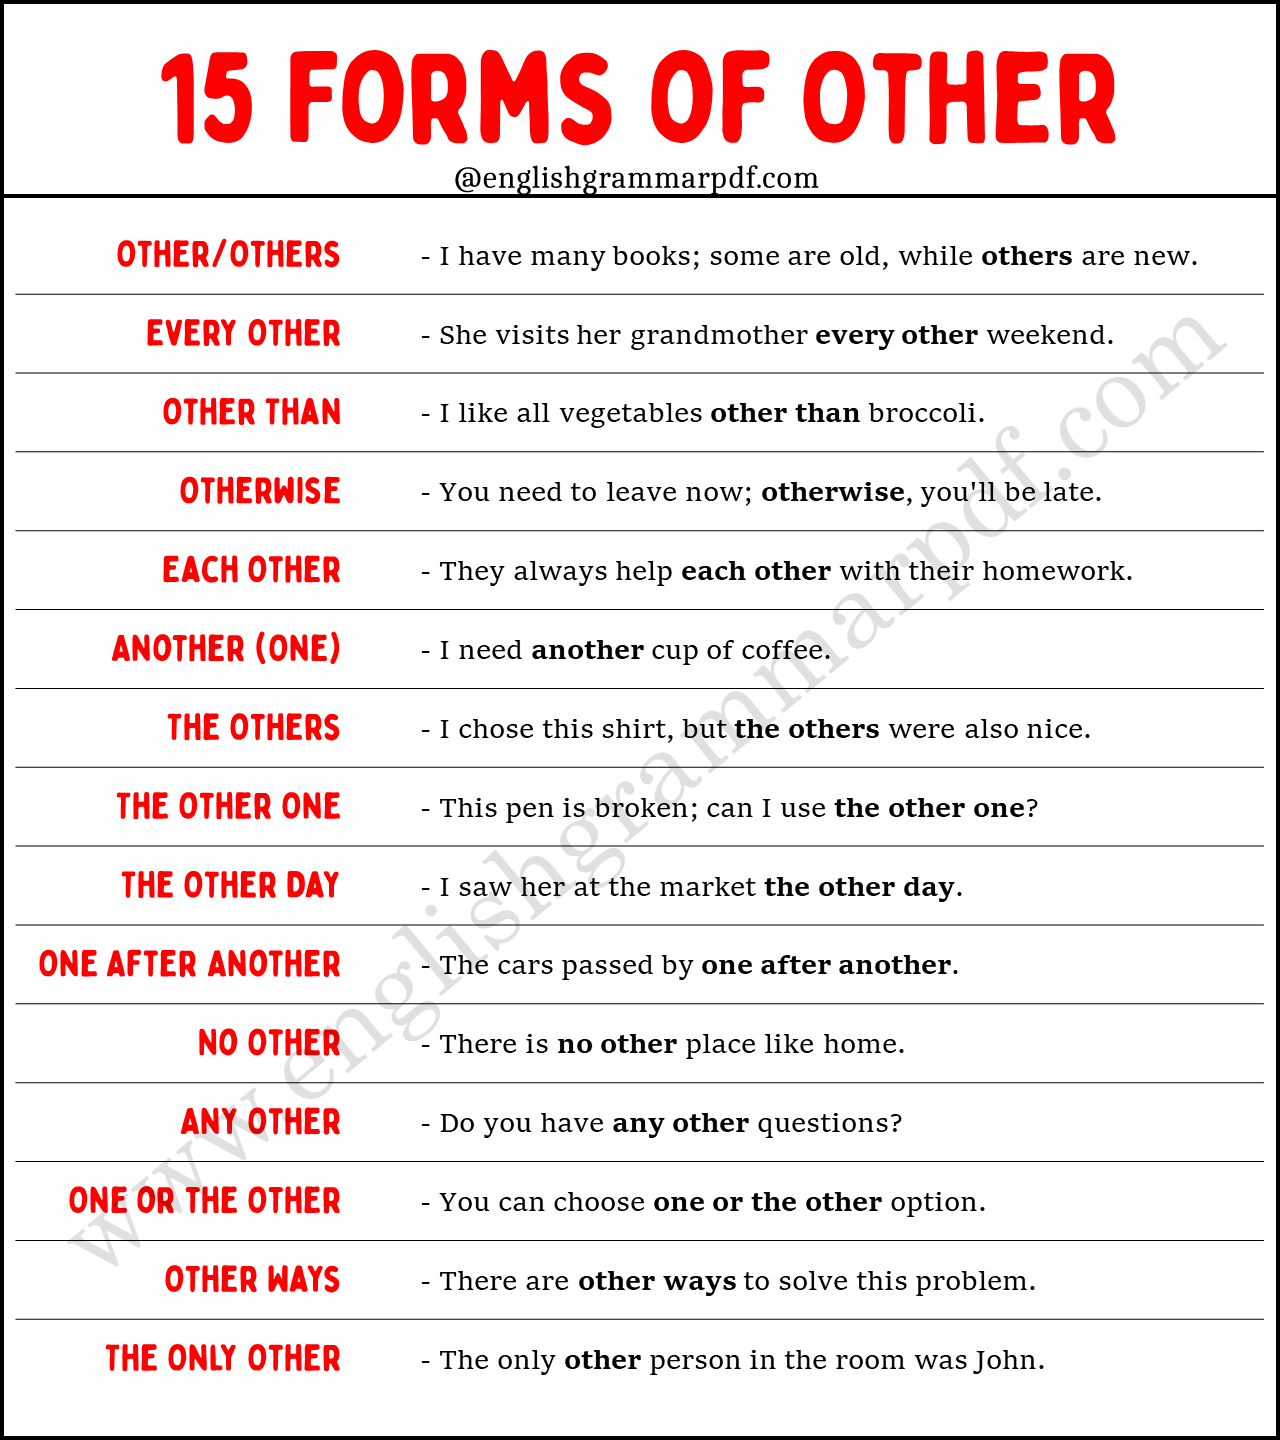 15 Forms of Other